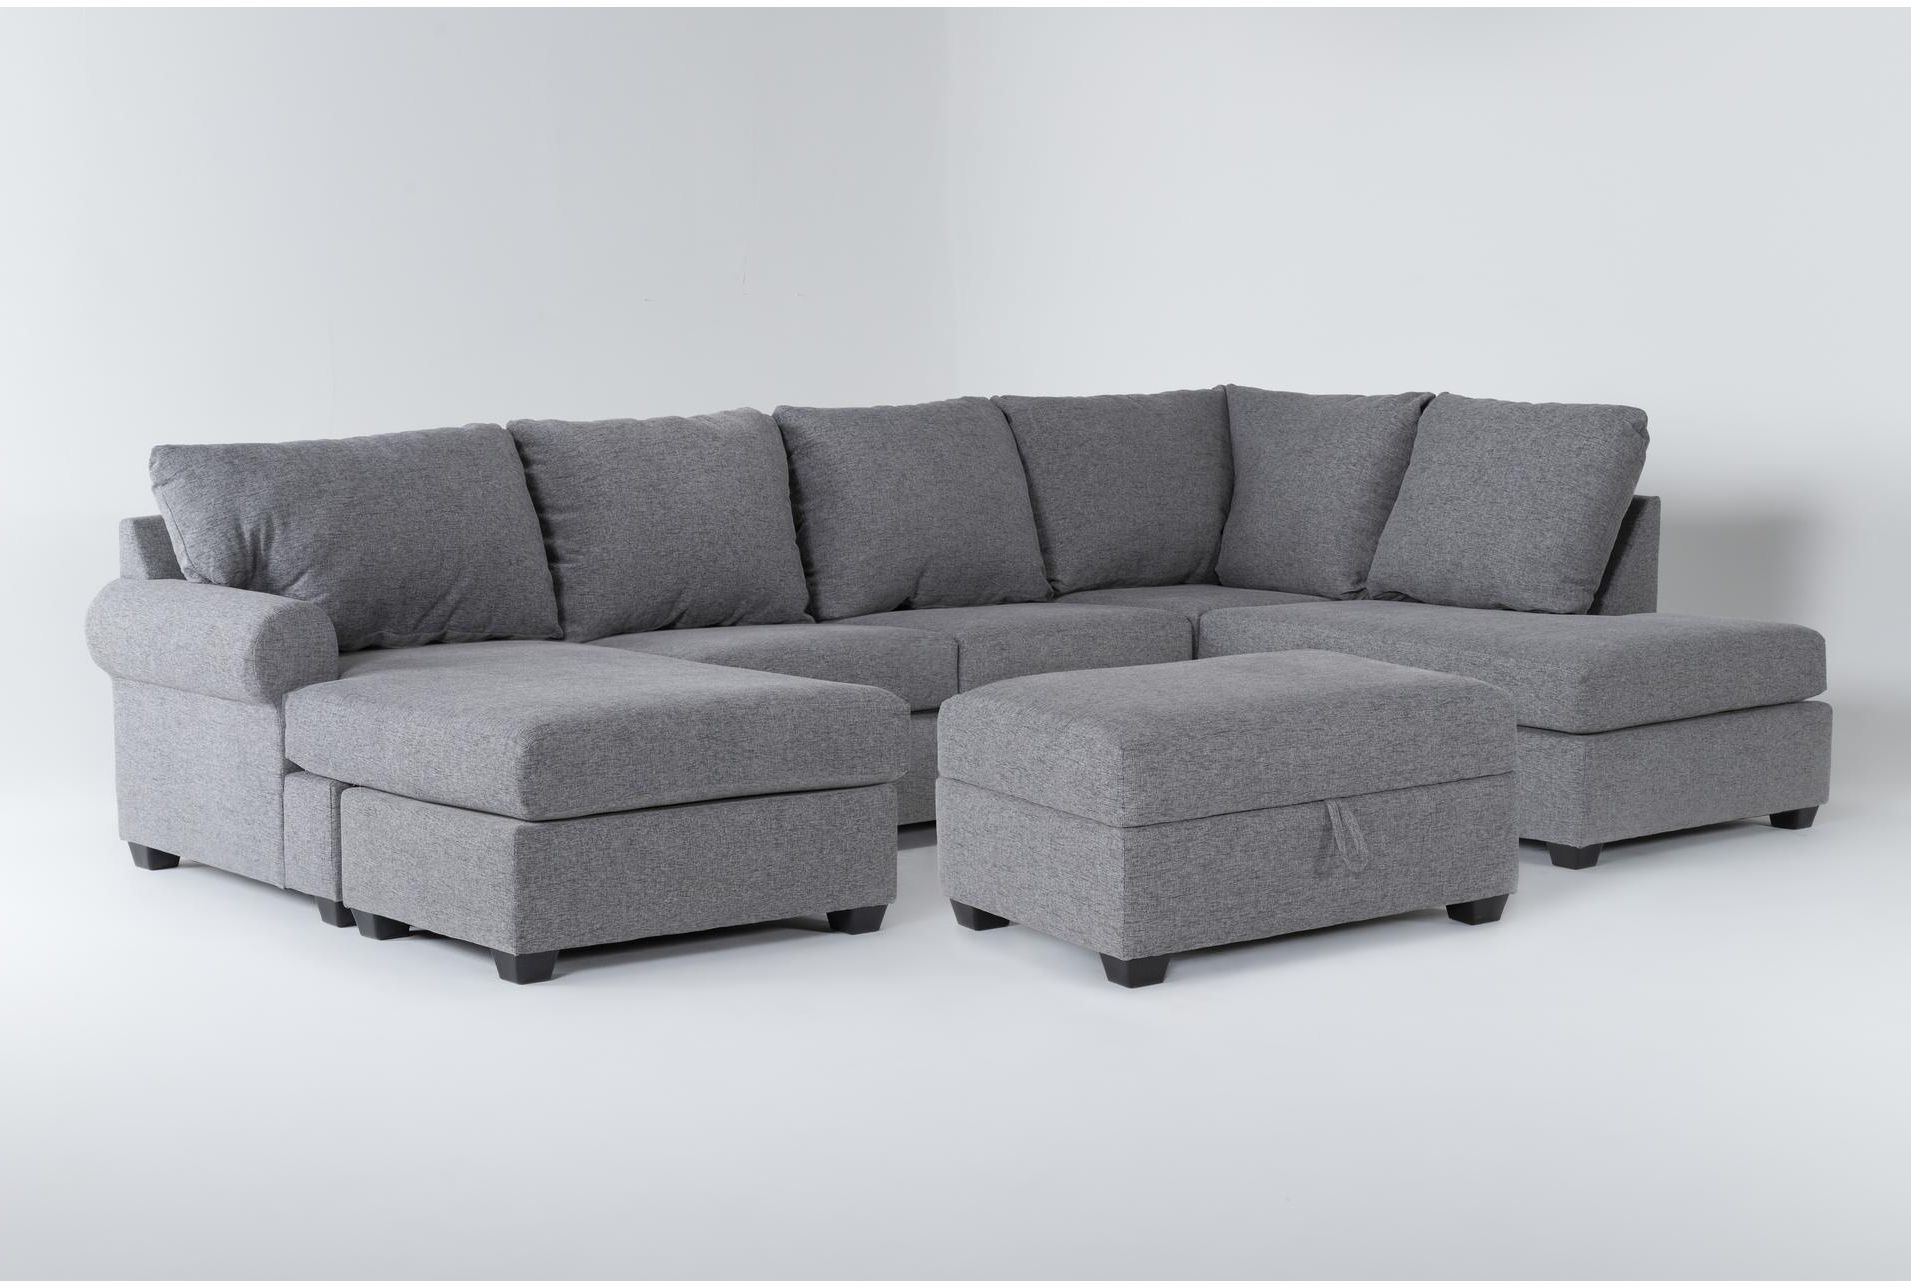 Hampstead Graphite 140" 2 Piece Sectional With Right Arm Facing Sleeper With Regard To Left Or Right Facing Sleeper Sectionals (View 8 of 20)